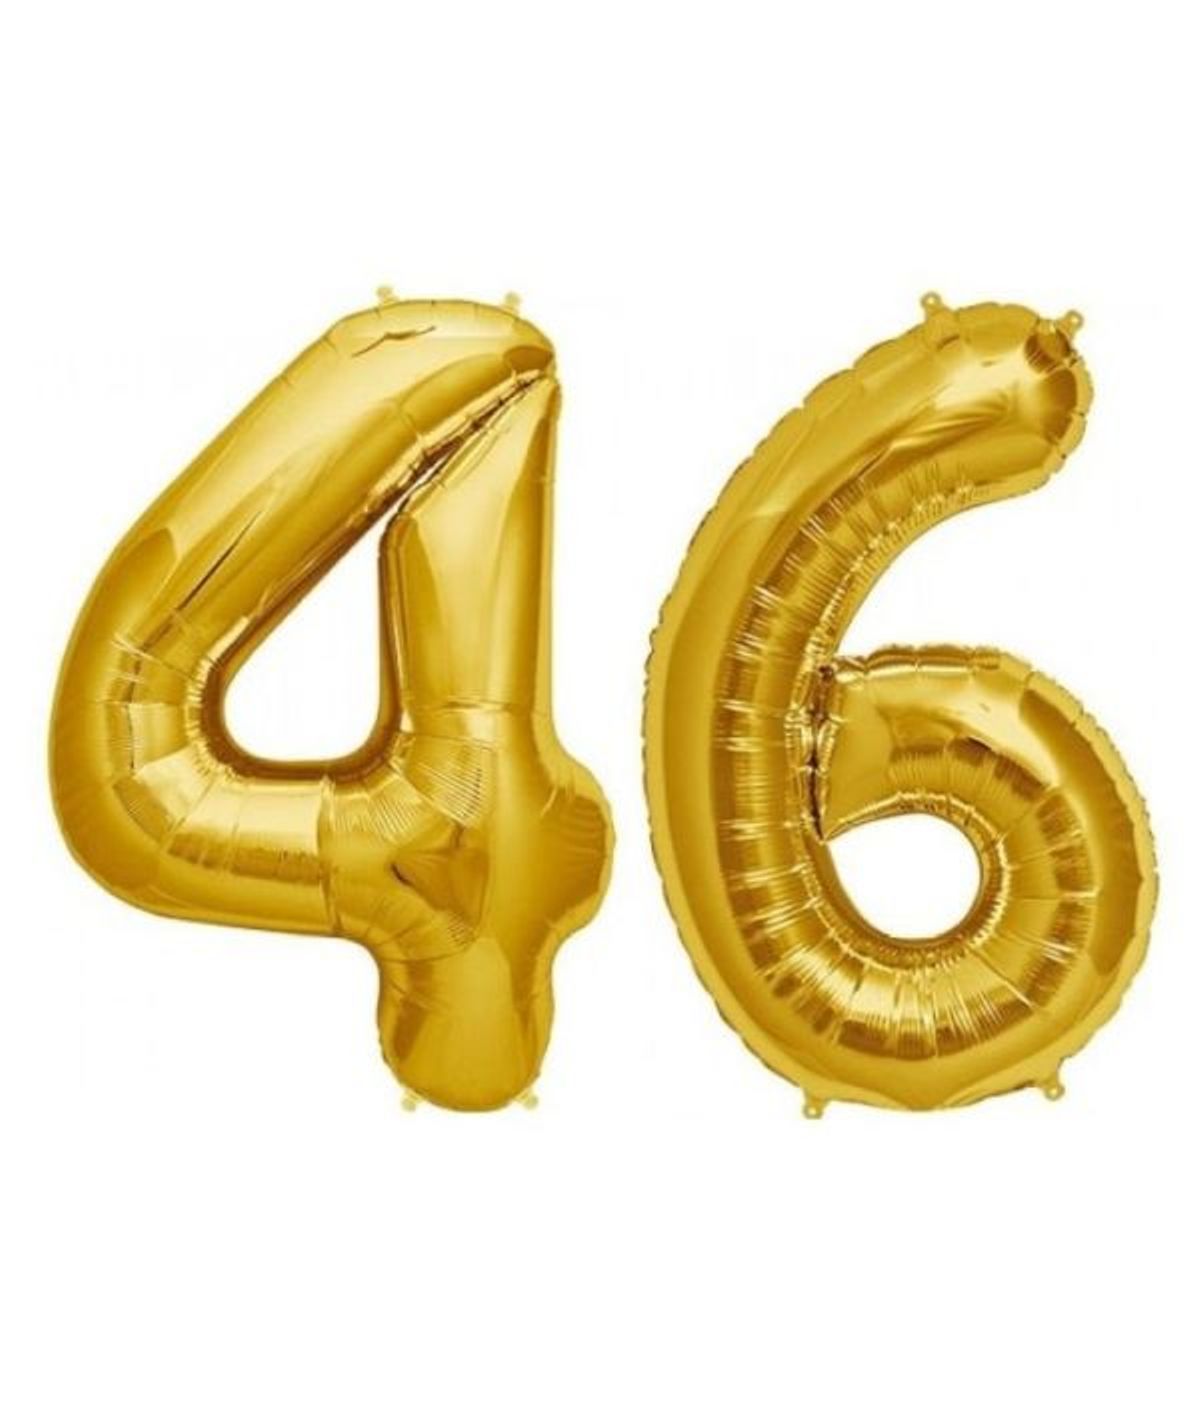 Number 46 Gold Foil Balloon 16 Inches